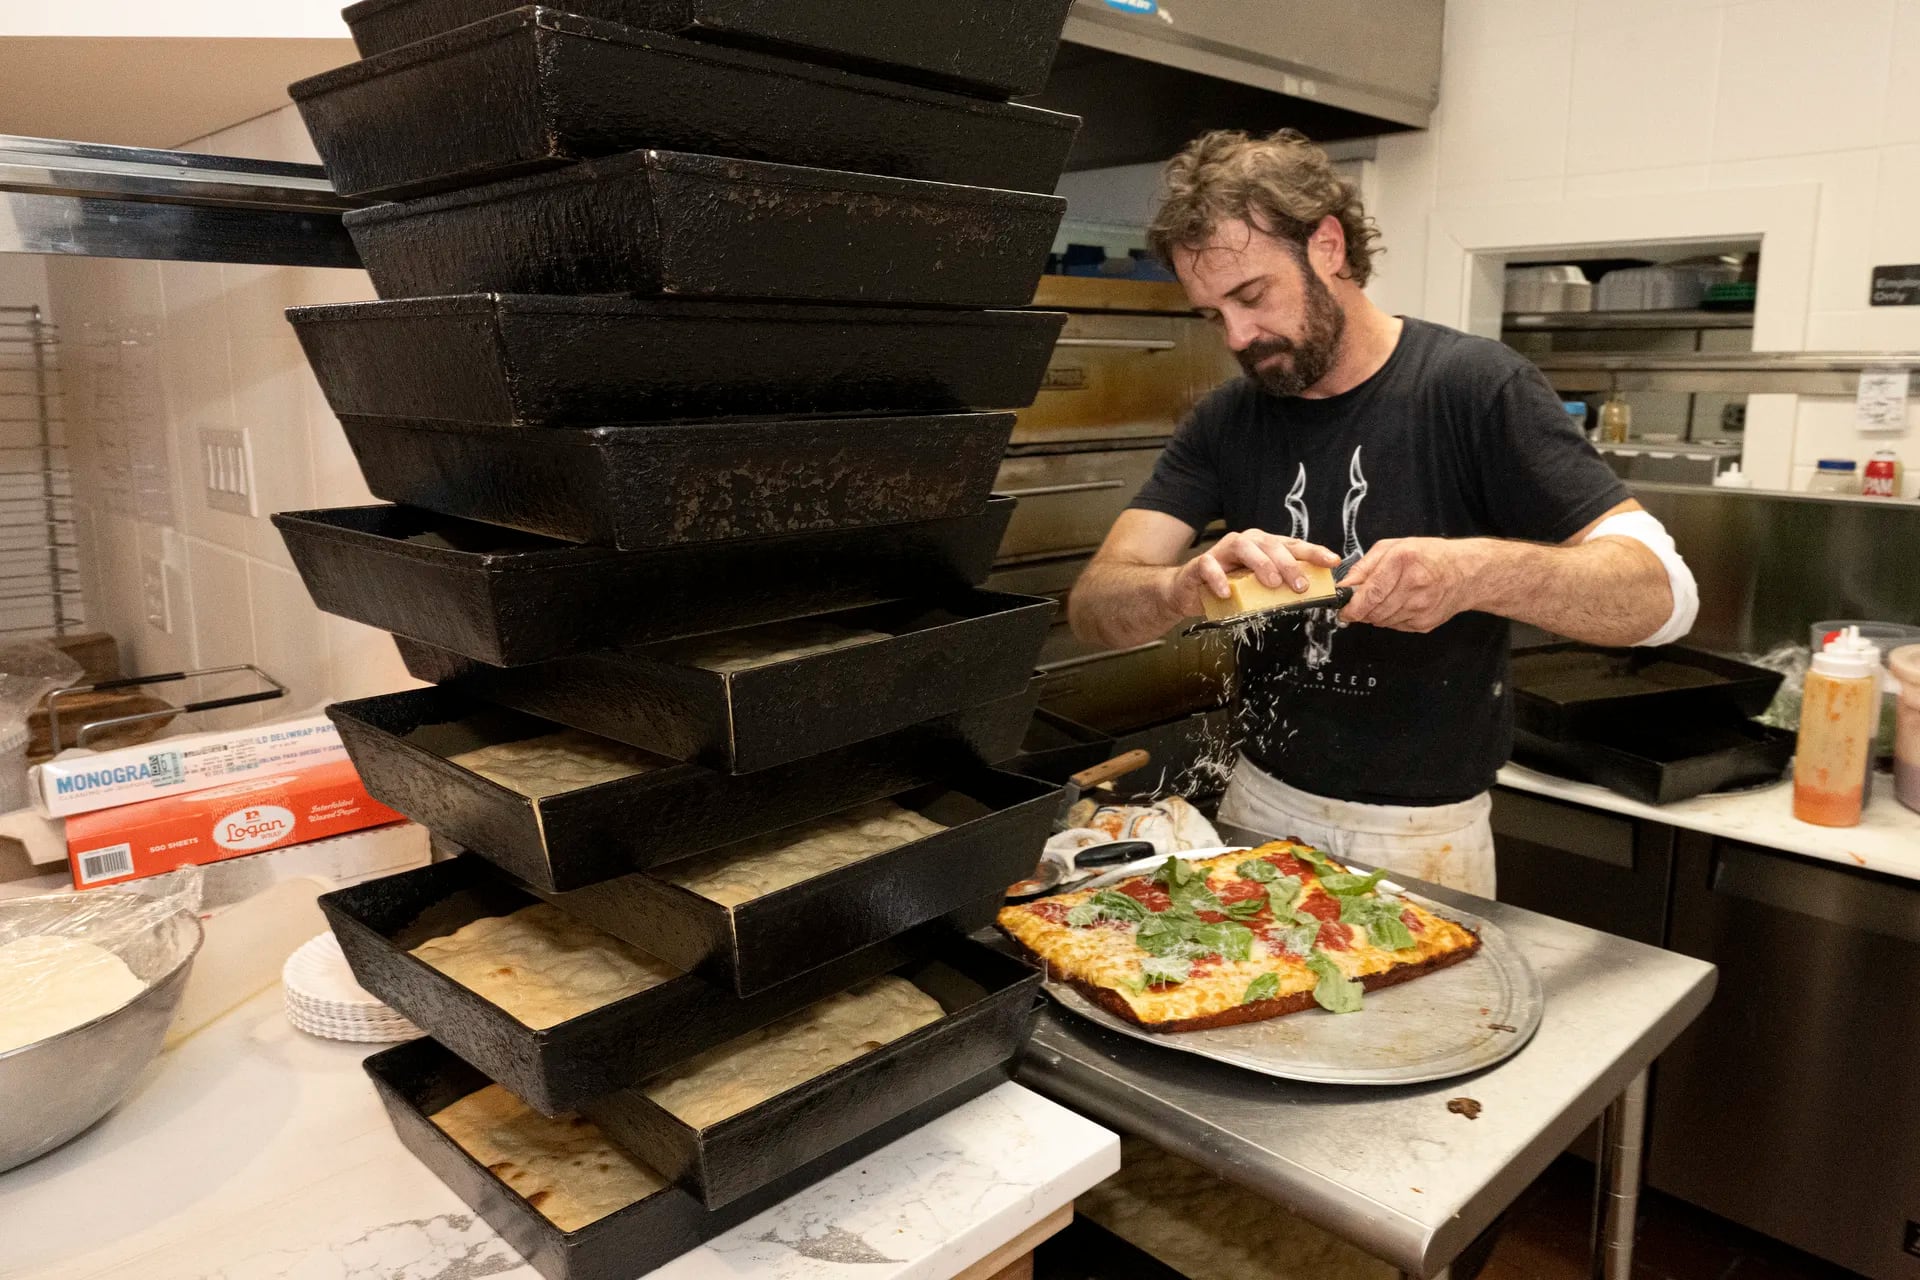 Chef owner Mike Fitzick works on a pizza at Bakeria 1010 in Ocean City.